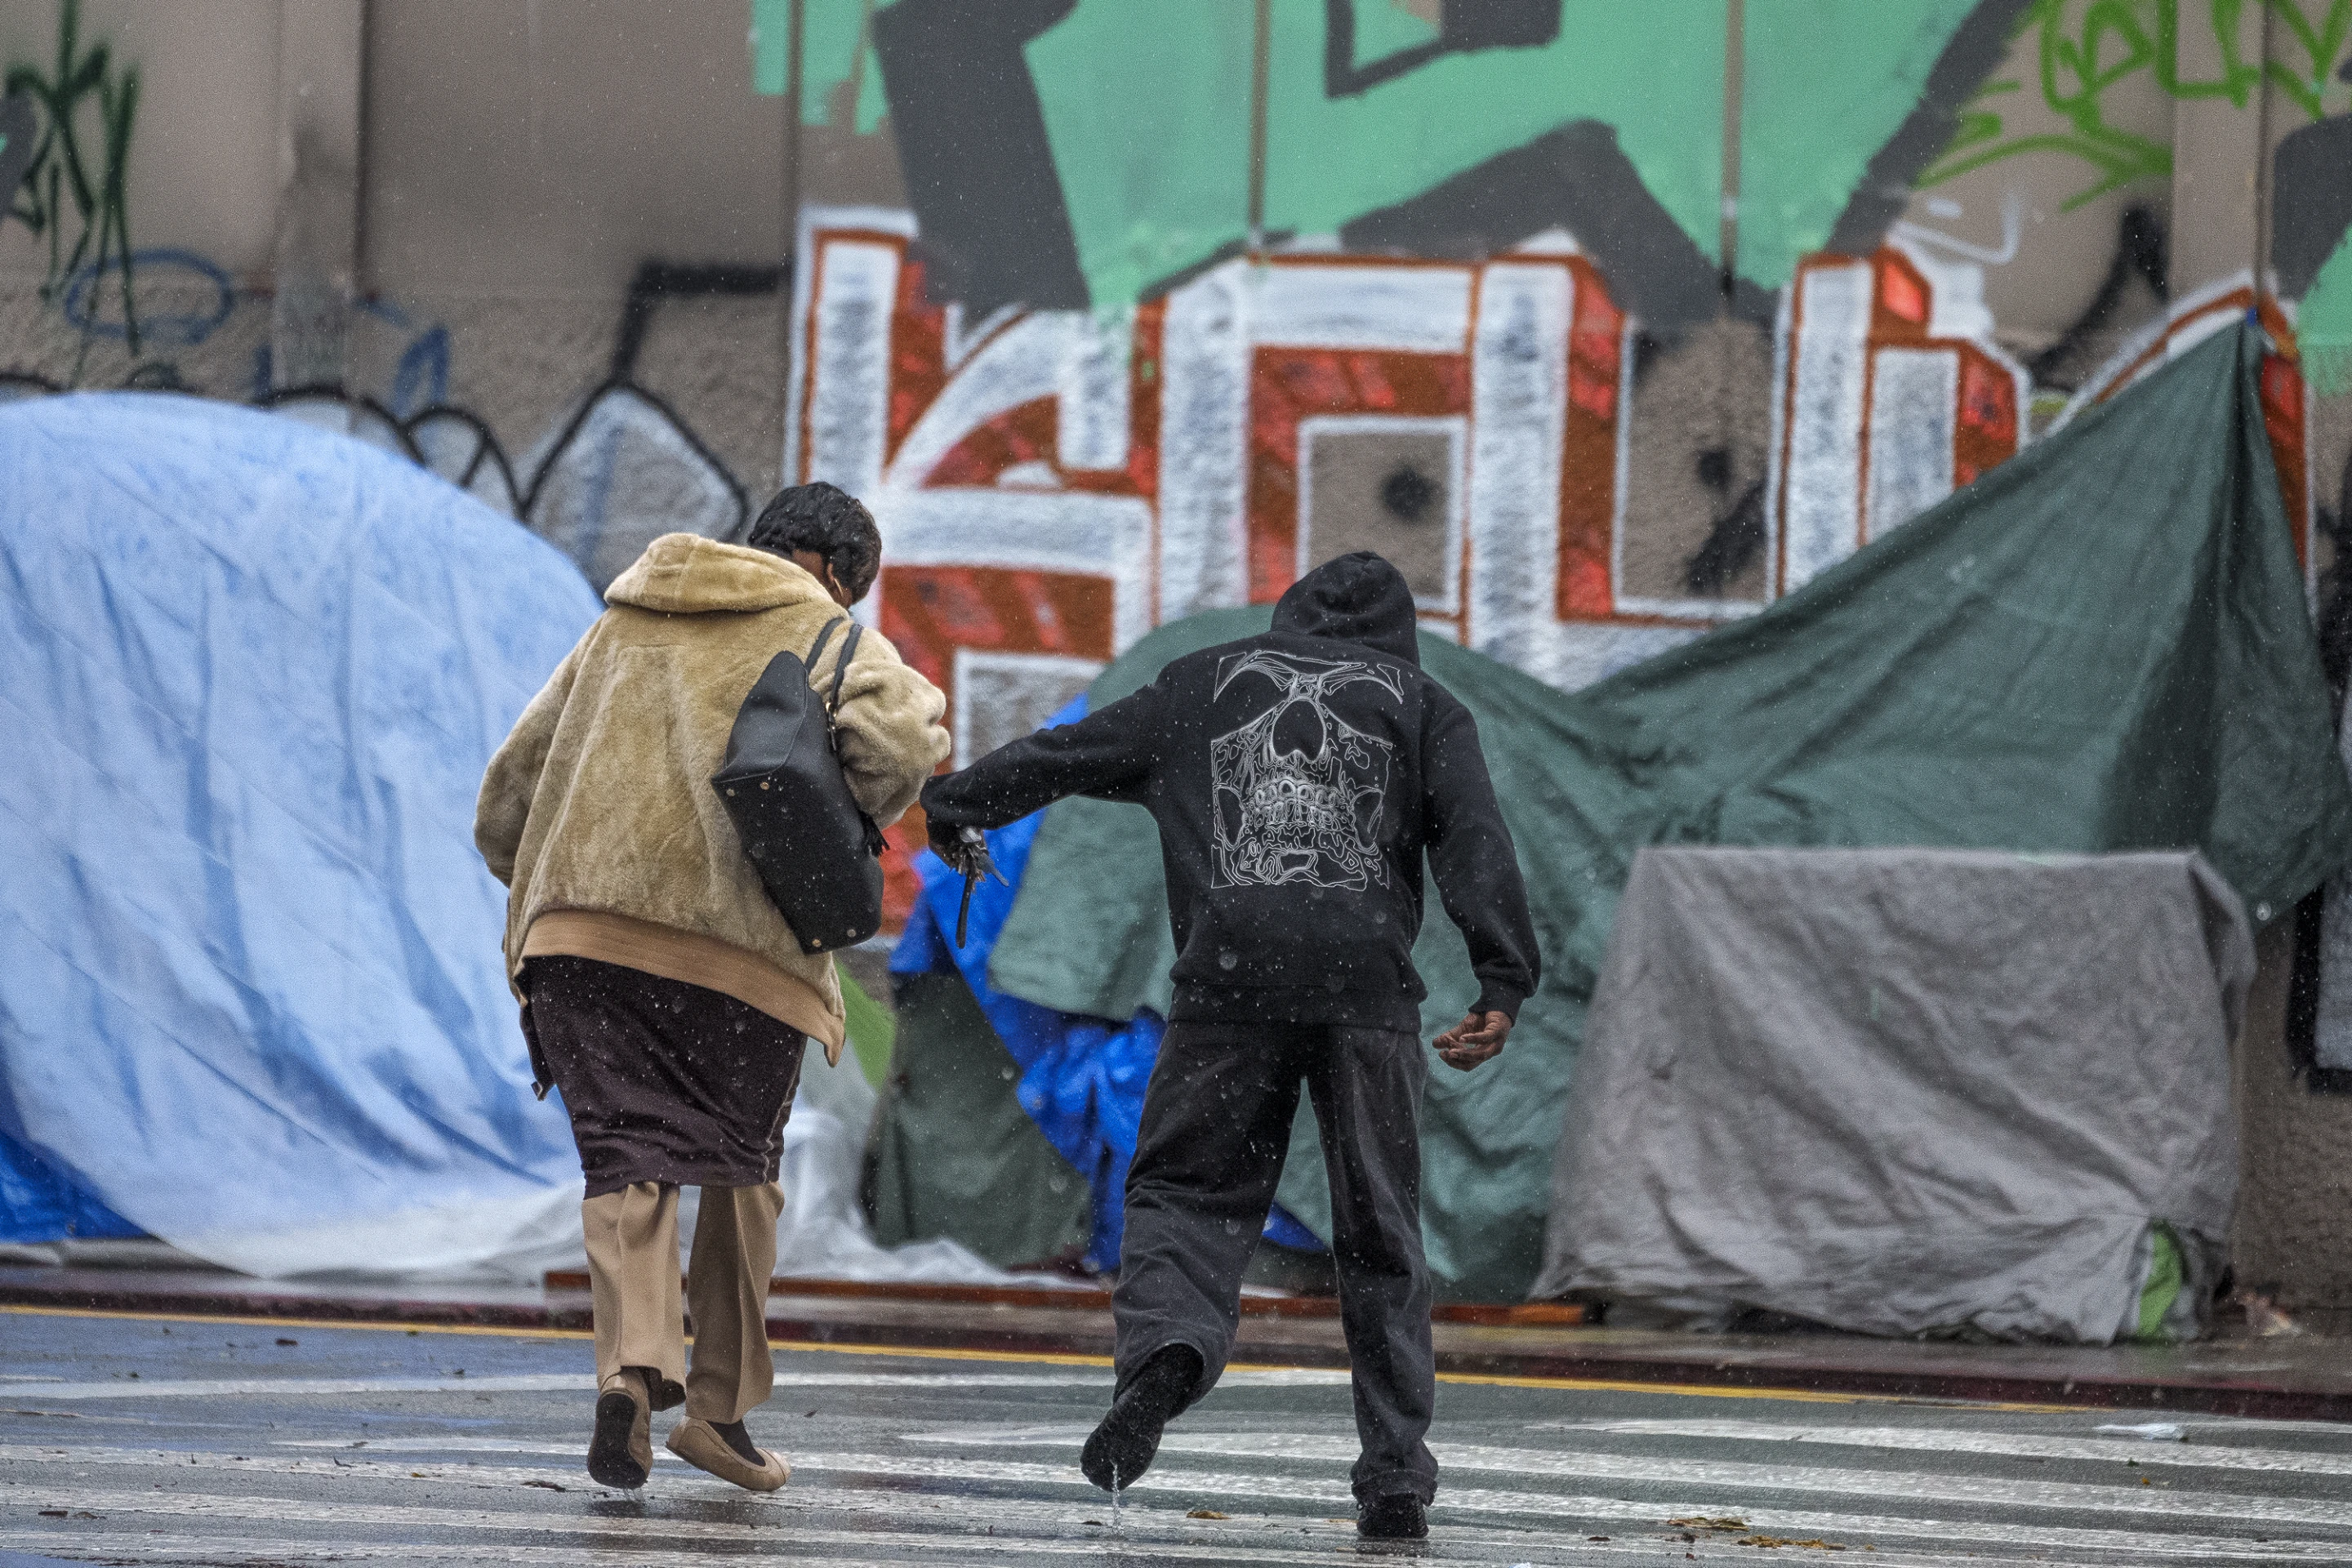 People cross the street under heavy rain in the Skid Row area, one of the largest populations of homeless people in the United States, Monday, 5 February 2024, in Los Angeles. A storm of historic proportions dumped a record amount of rain over parts of Los Angeles on Monday, sending mud and boulders down hillsides dotted with multimillion-dollar homes while people living in homeless encampments in many parts of the city scrambled for safety. Shelters were adding beds for the city’s homeless population of nearly 75,000 people. Photo: Damian Dovarganes / AP Photo